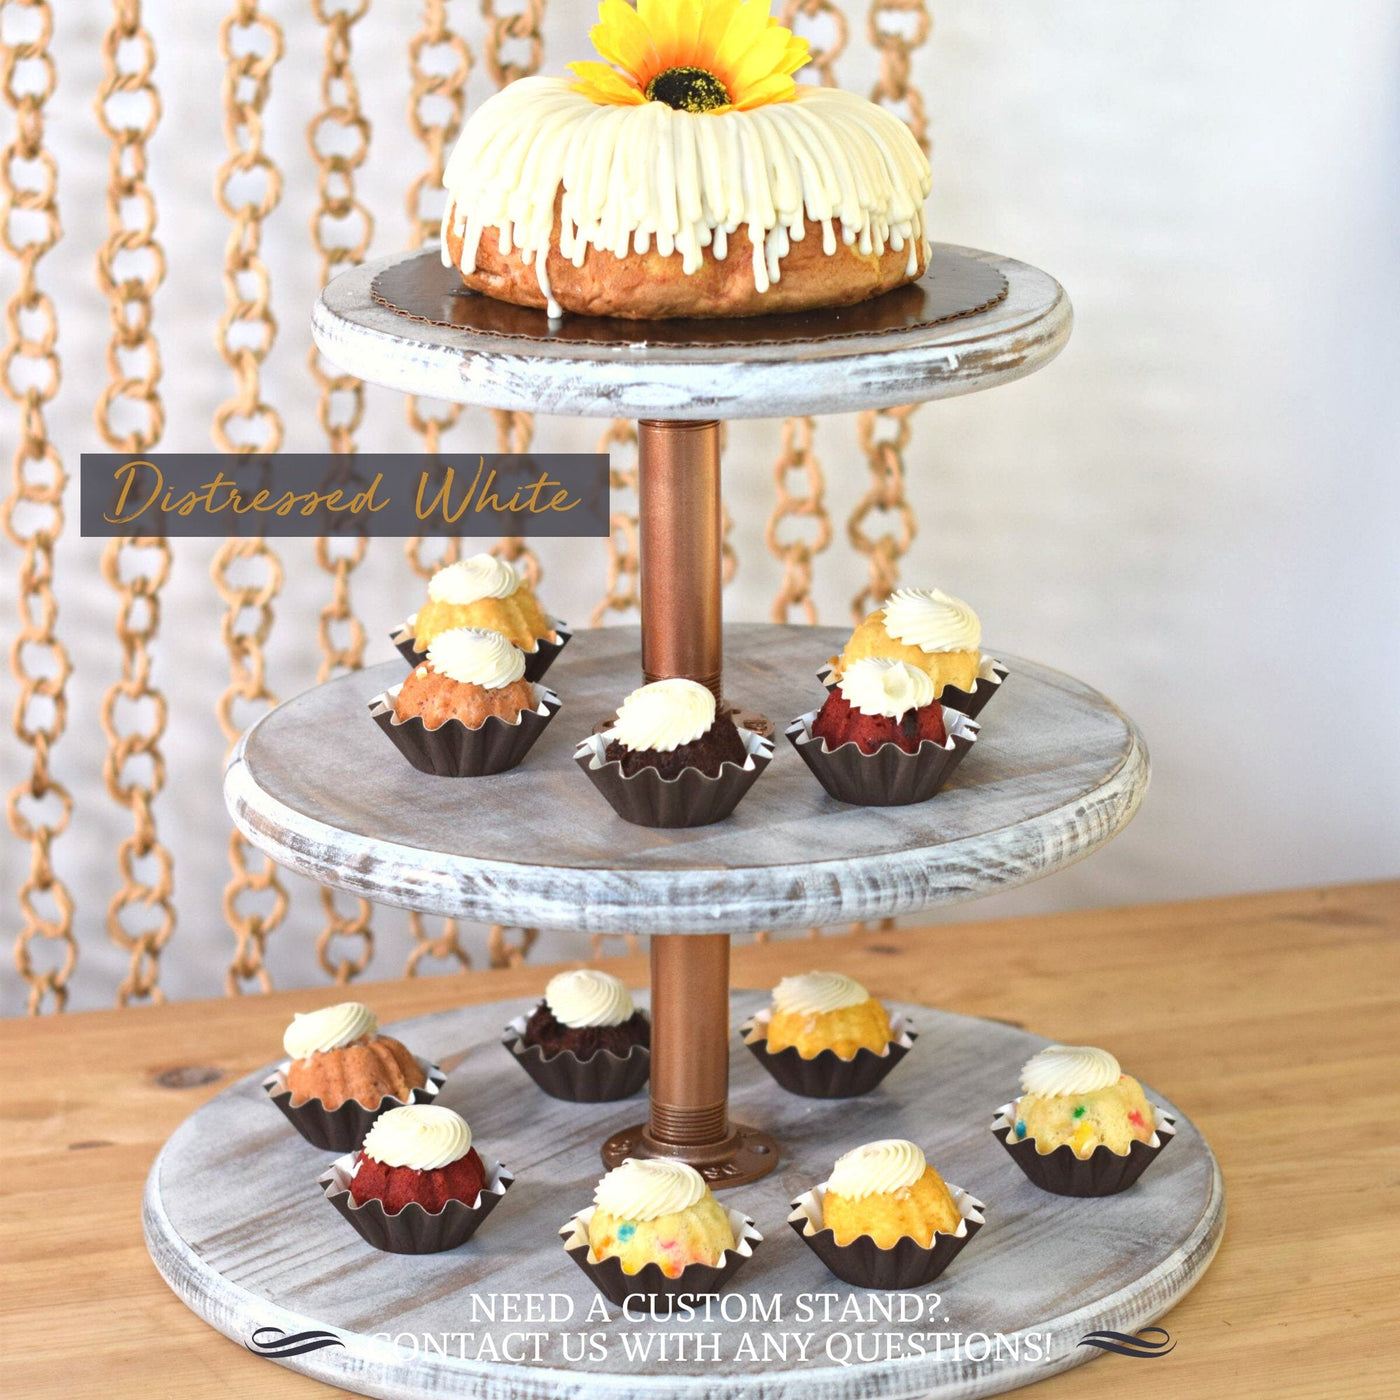 Wood Cupcake Tiered Stand Rustic Cake Tier Display Wedding and Event Decor 3-Tier Stand